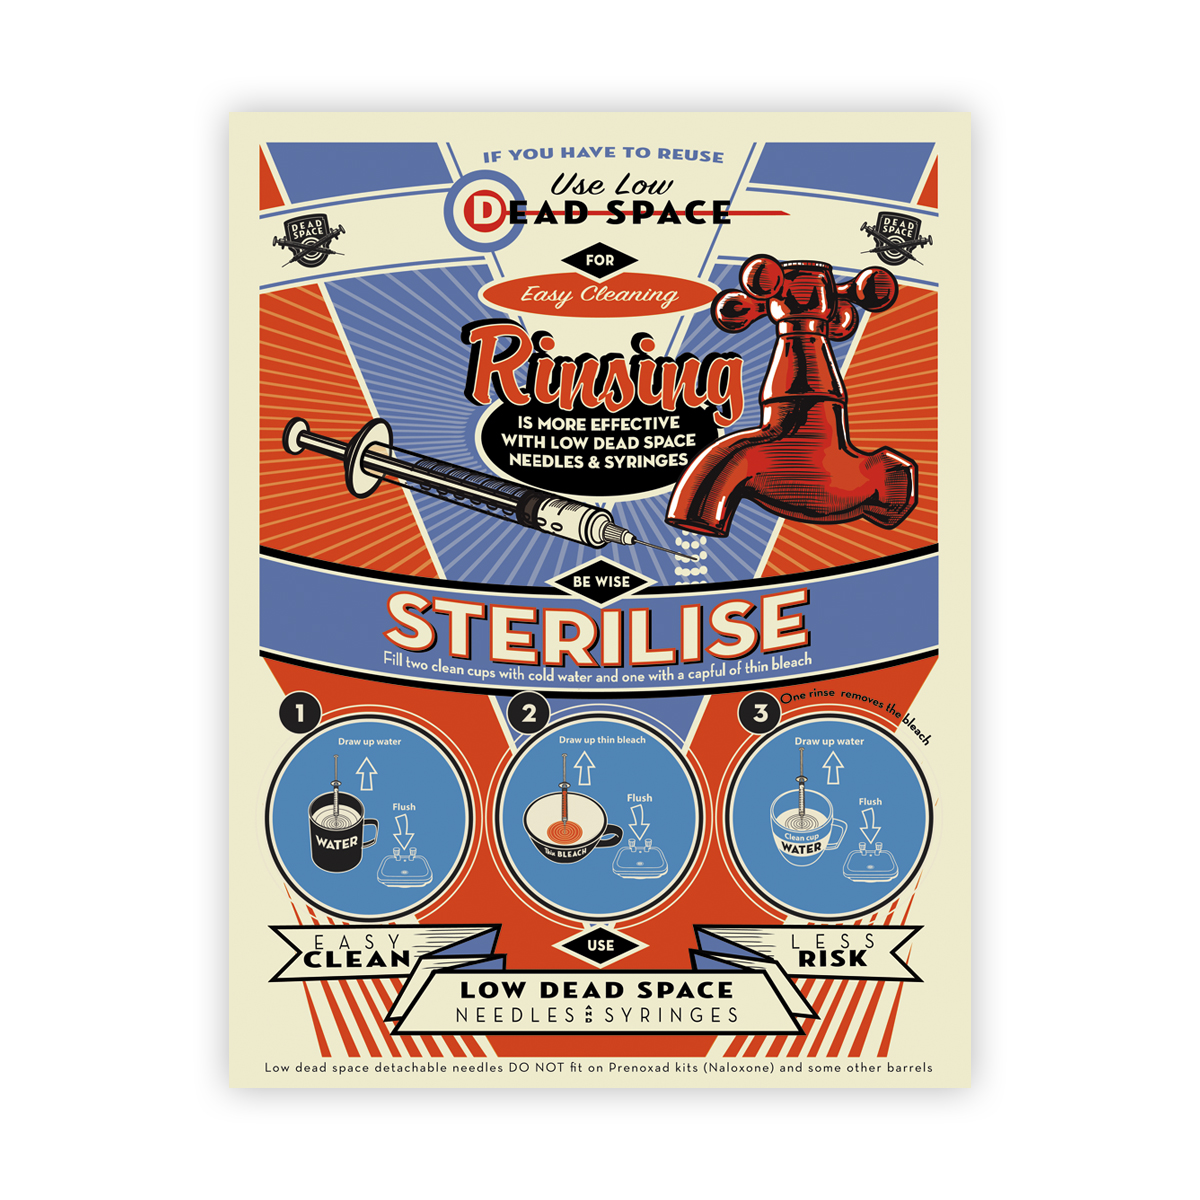 Be wise, sterilise poster 